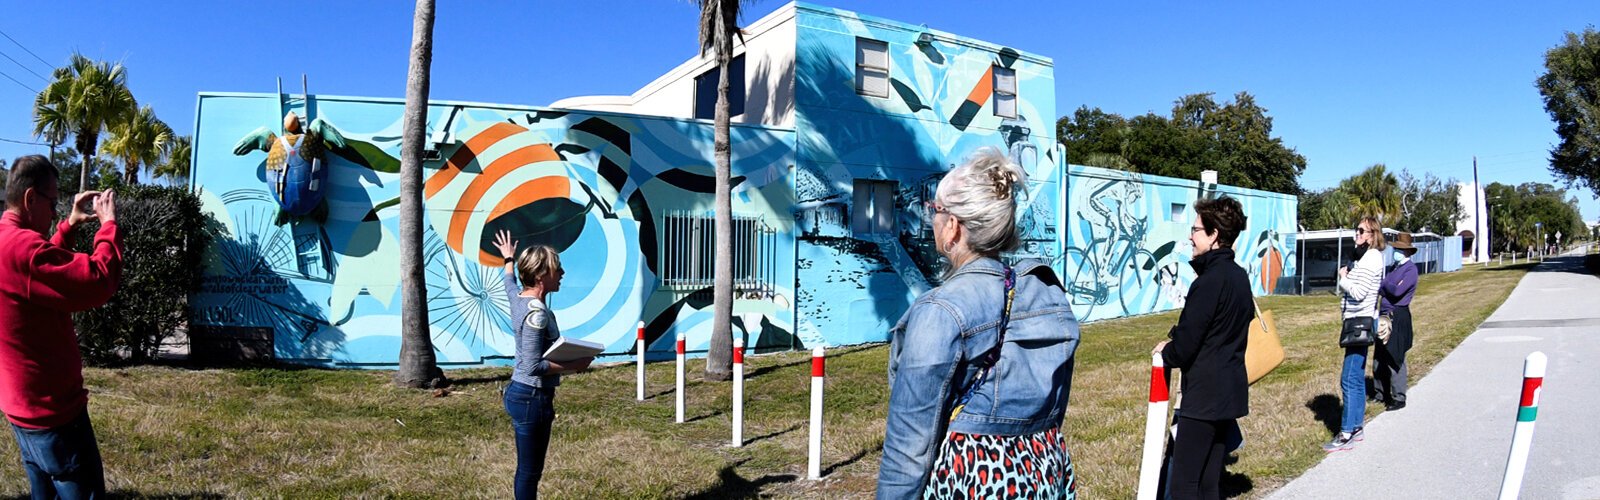 Clearwater Arts Alliance President Roberta Klar gives information about a mural inspired by the history of the region and located by the Pinellas Trail, titled “One Hundred Years Before J Cole” and done by artist duo Michelle Sawyer and Tony Krol.